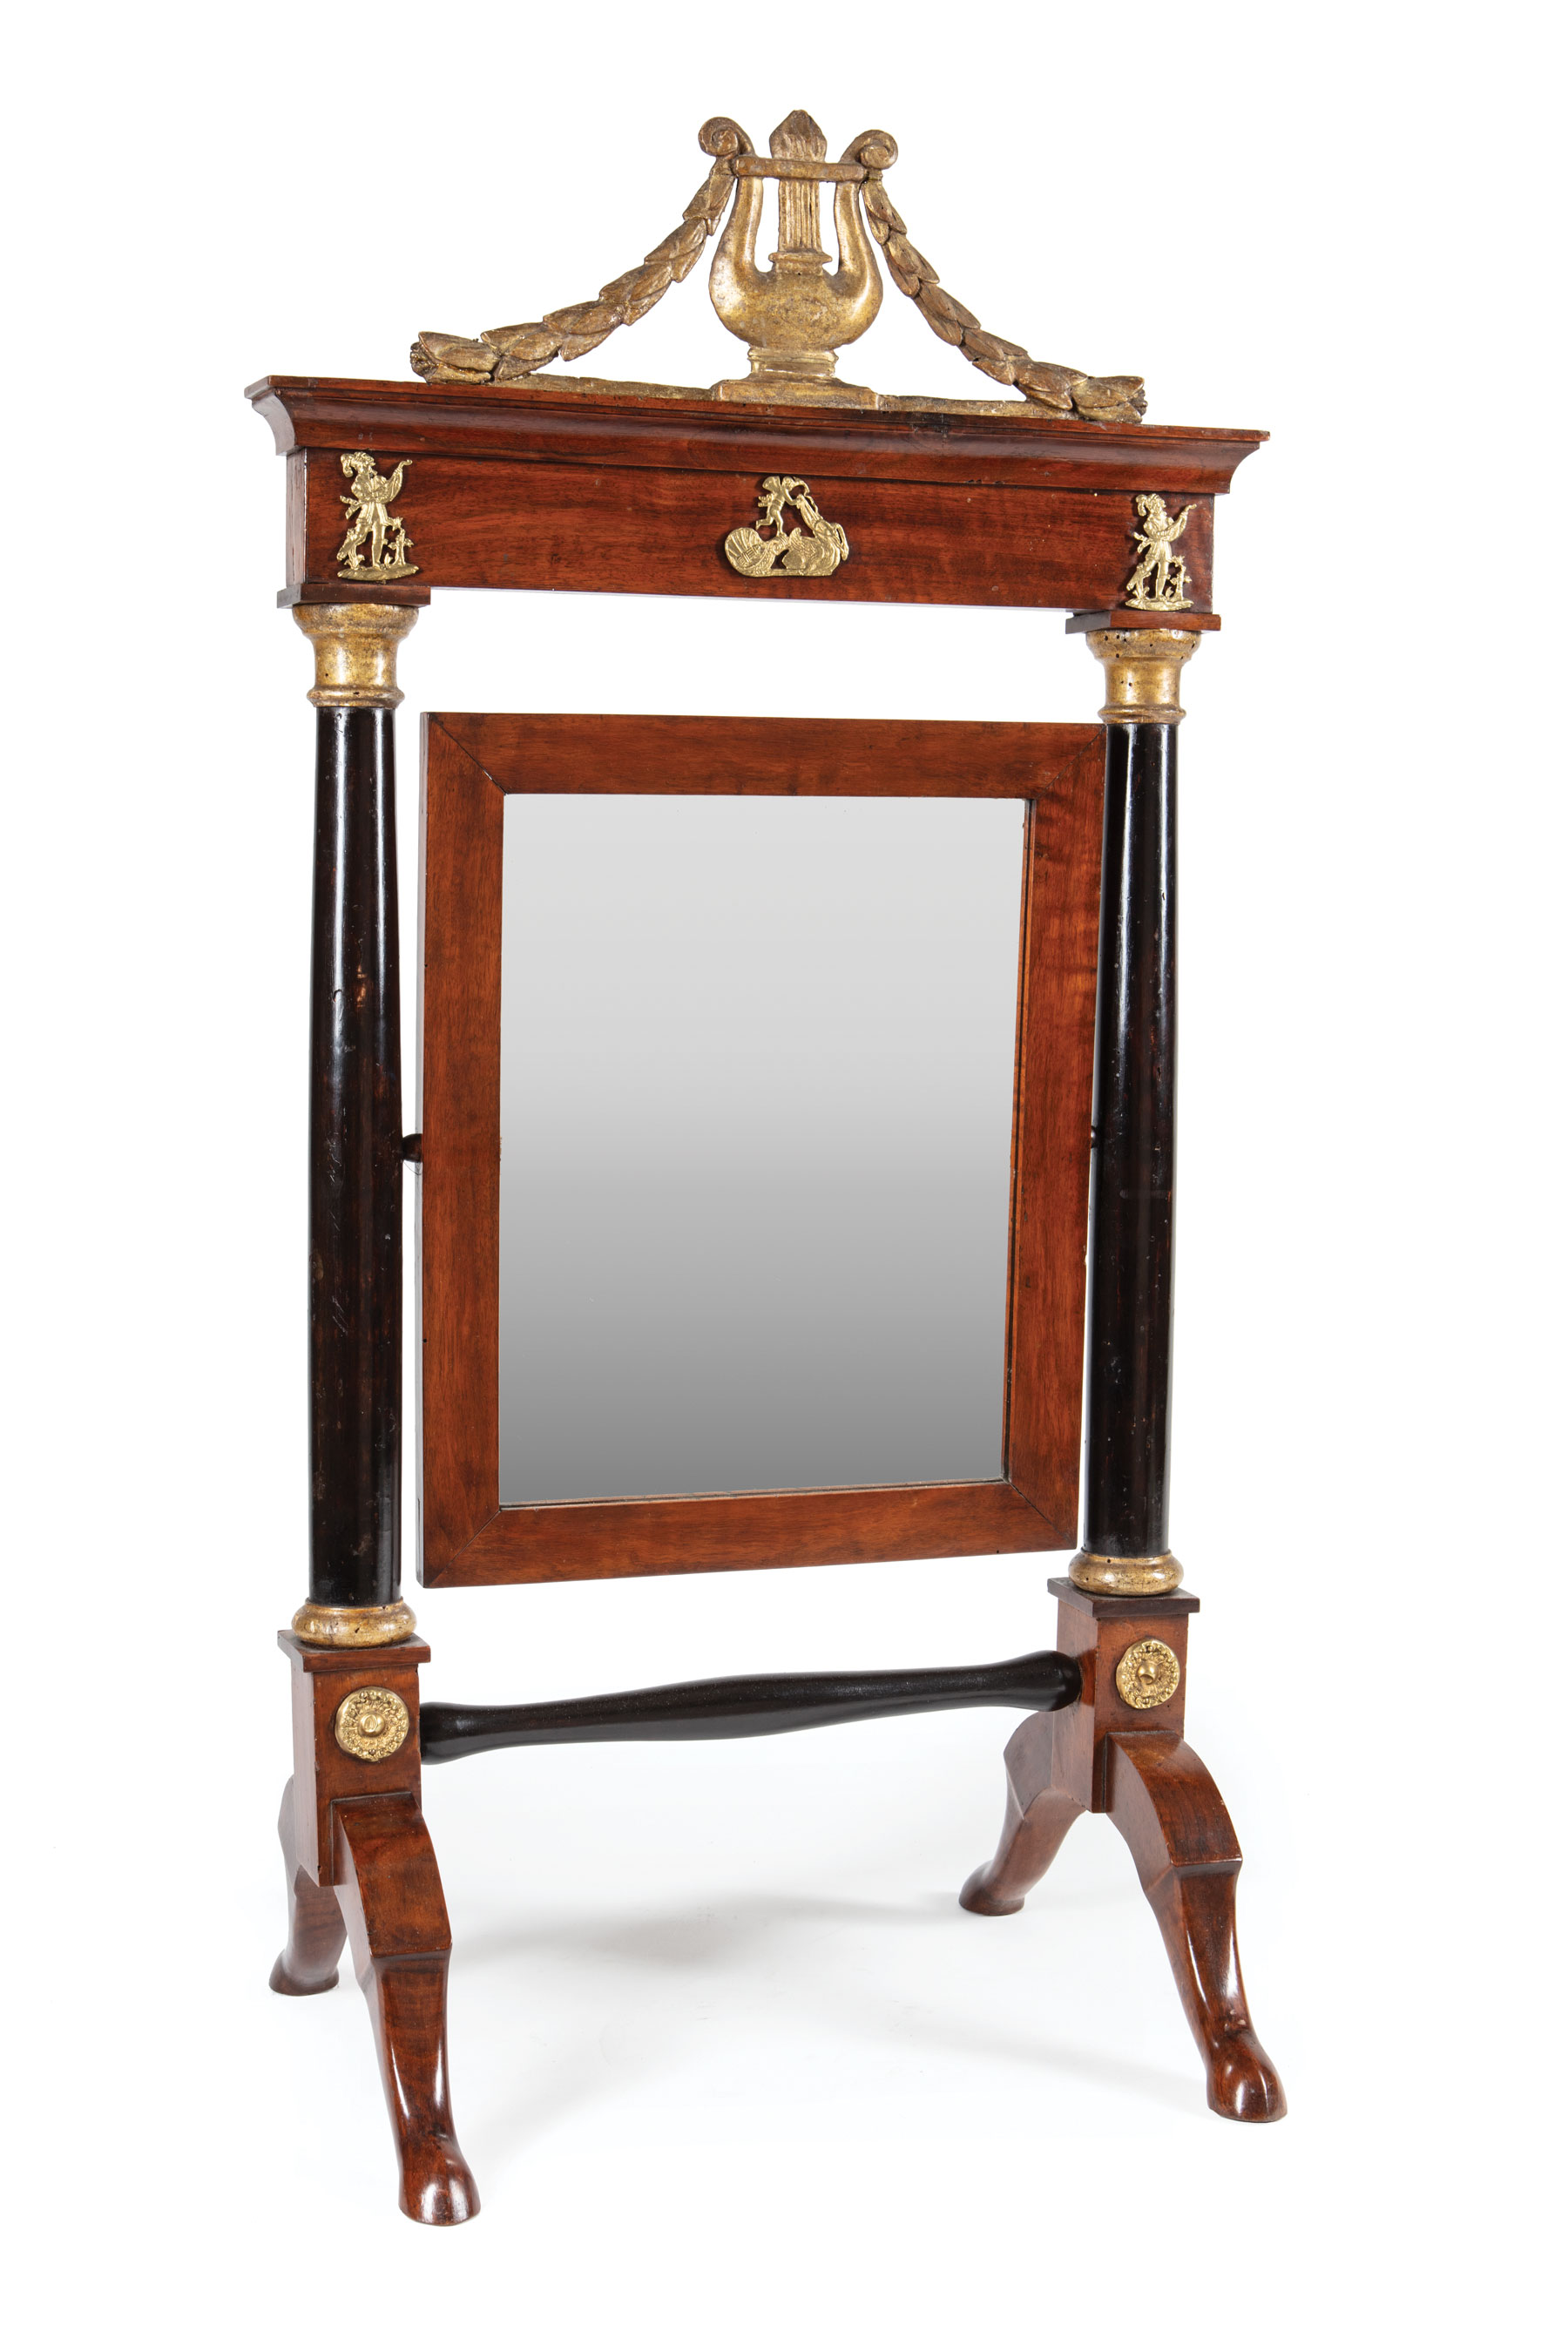 Empire Bronze-Mounted and Parcel Ebonized Mahogany Dressing Mirror, early 19th c., lyre and swag